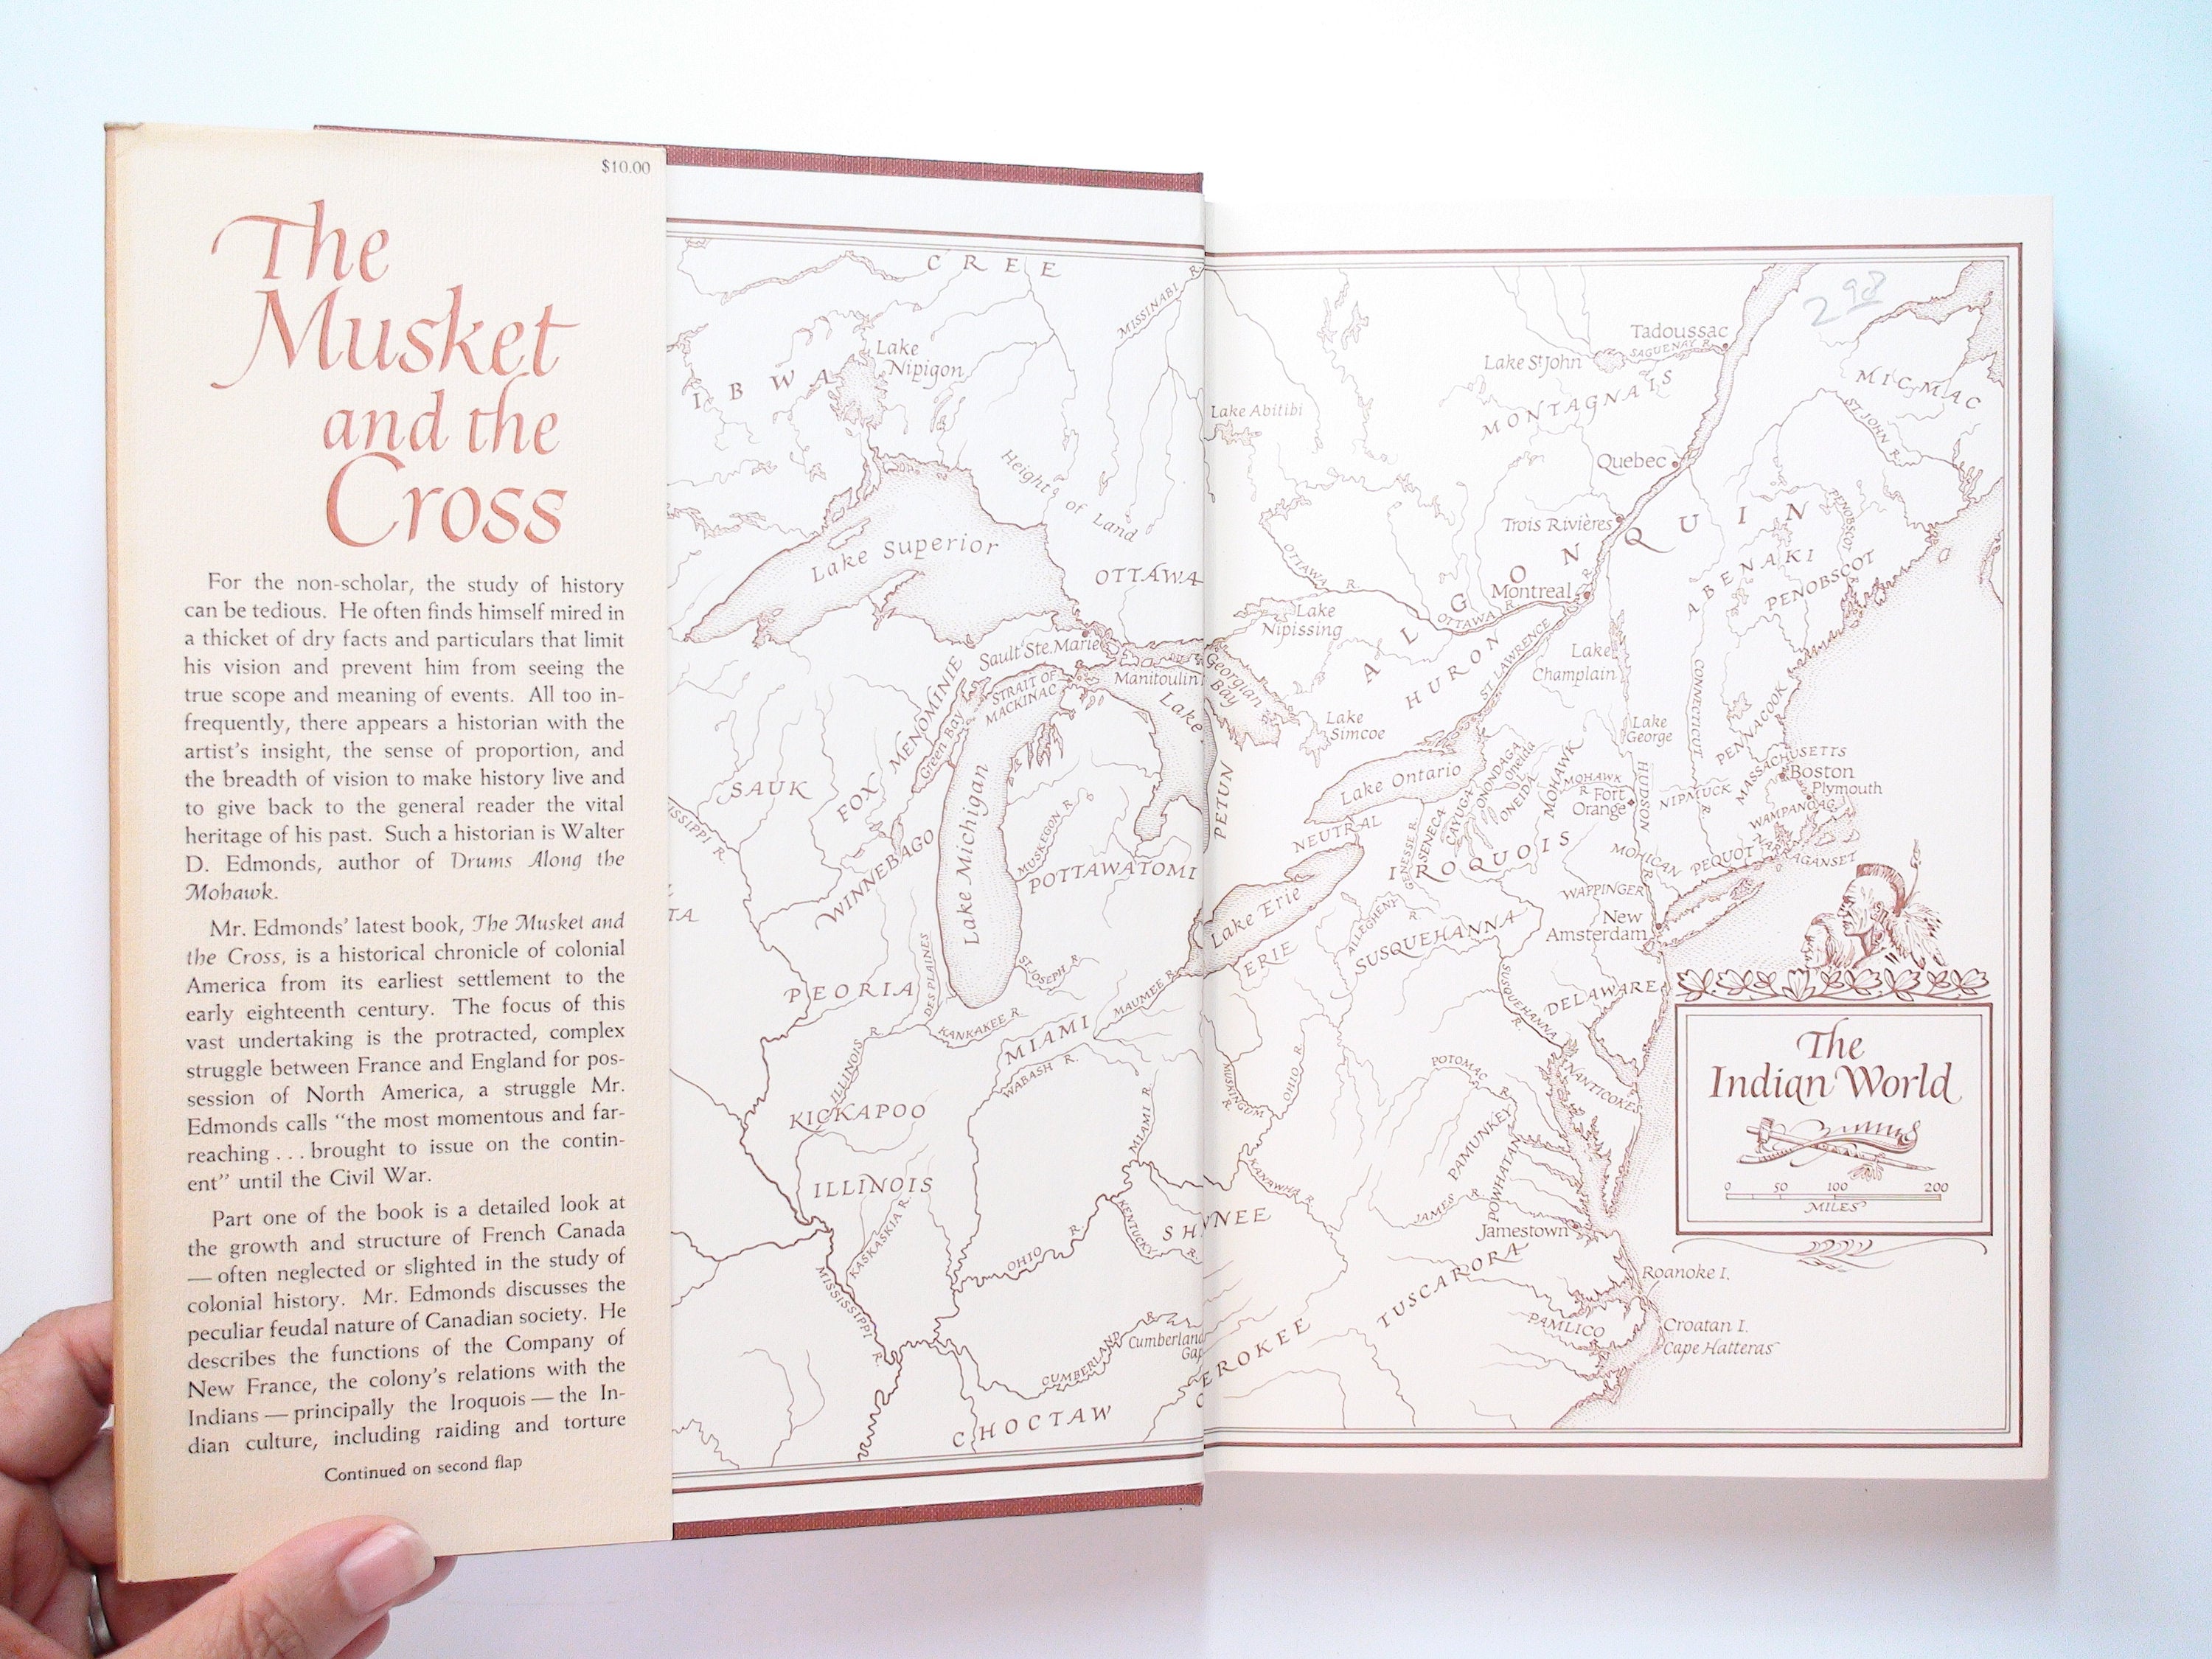 The Musket and the Cross by Walter D. Edmonds, With Maps, 1st Ed, 1968